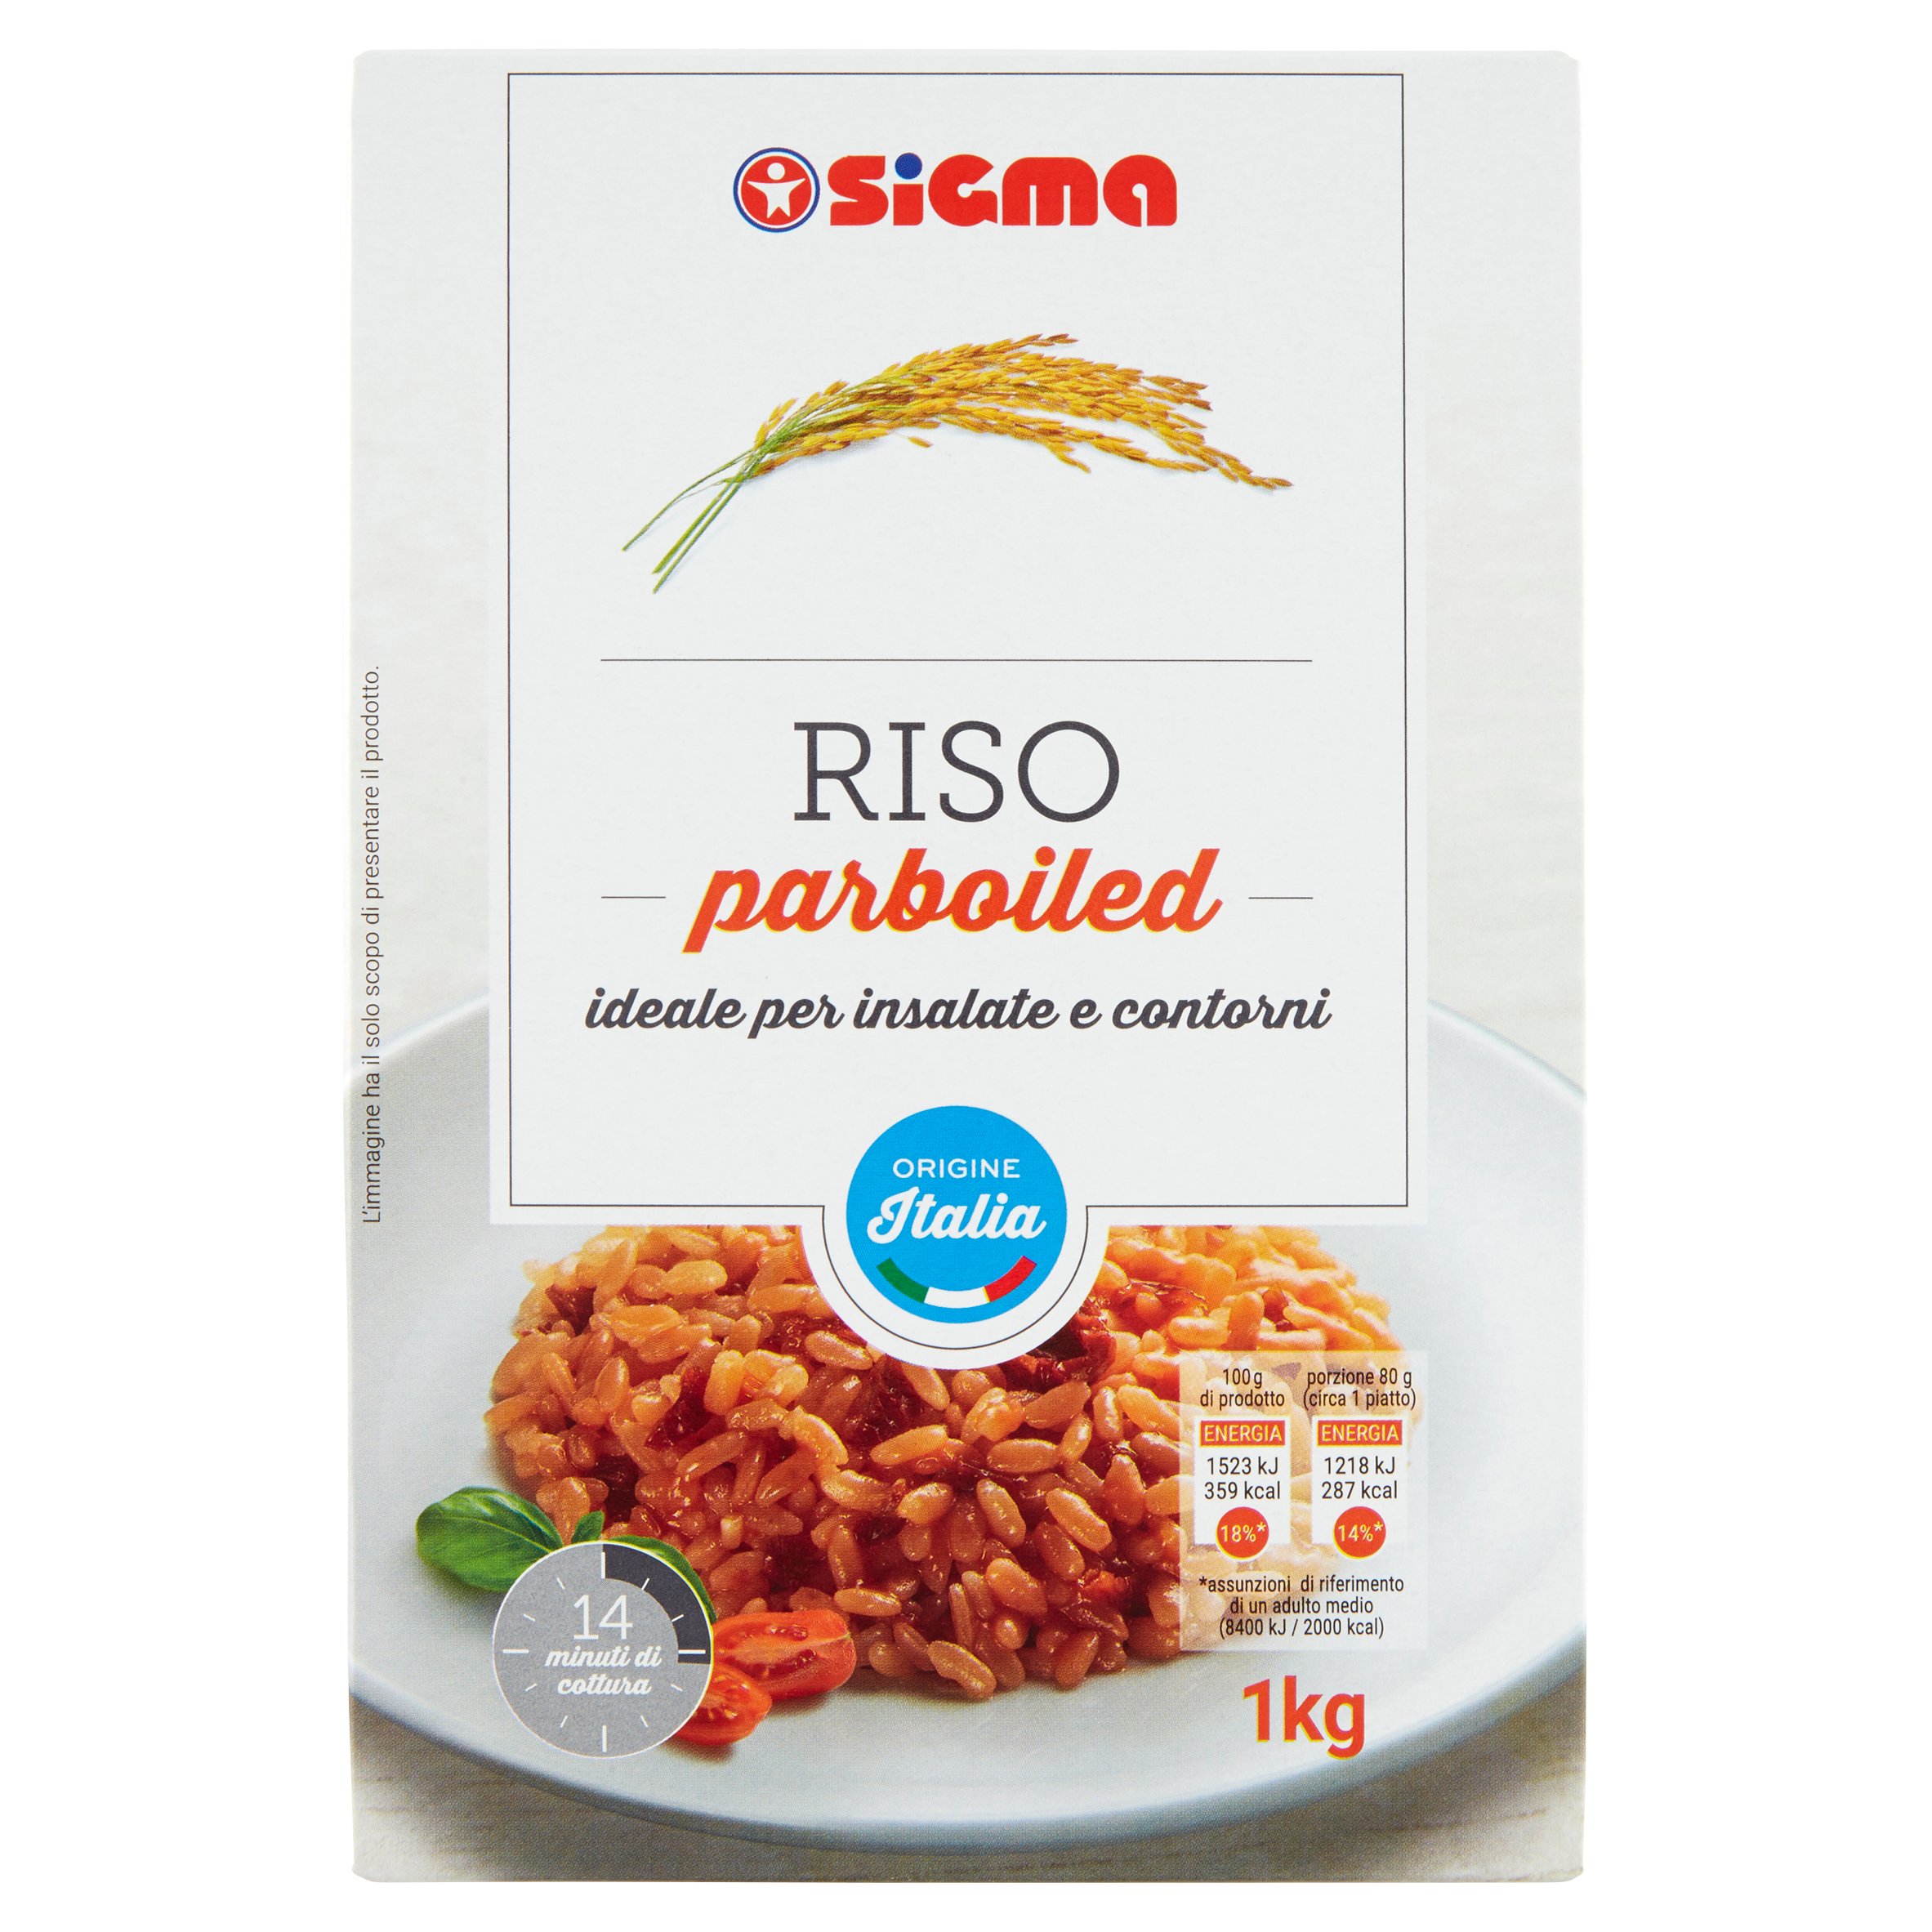 Sigma Riso parboiled 1 kg - SuperSIGMA